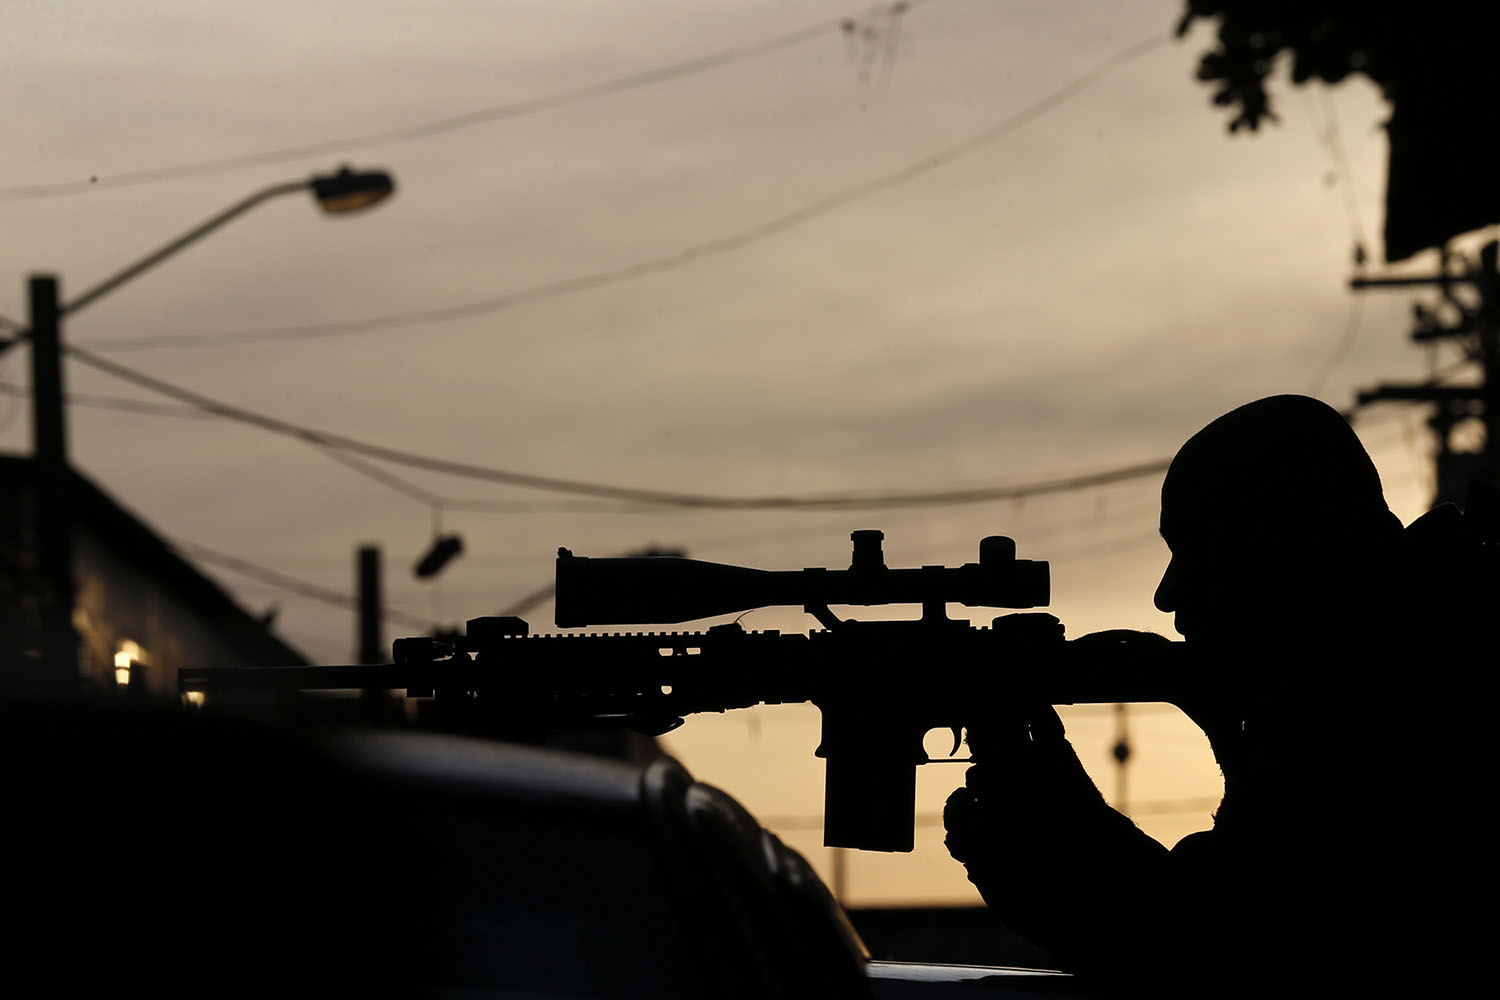 Mar. 30, 2014. A sniper of Special Operations Battalion (BOPE) takes position at the Mare slums complex in Rio de Janeiro.